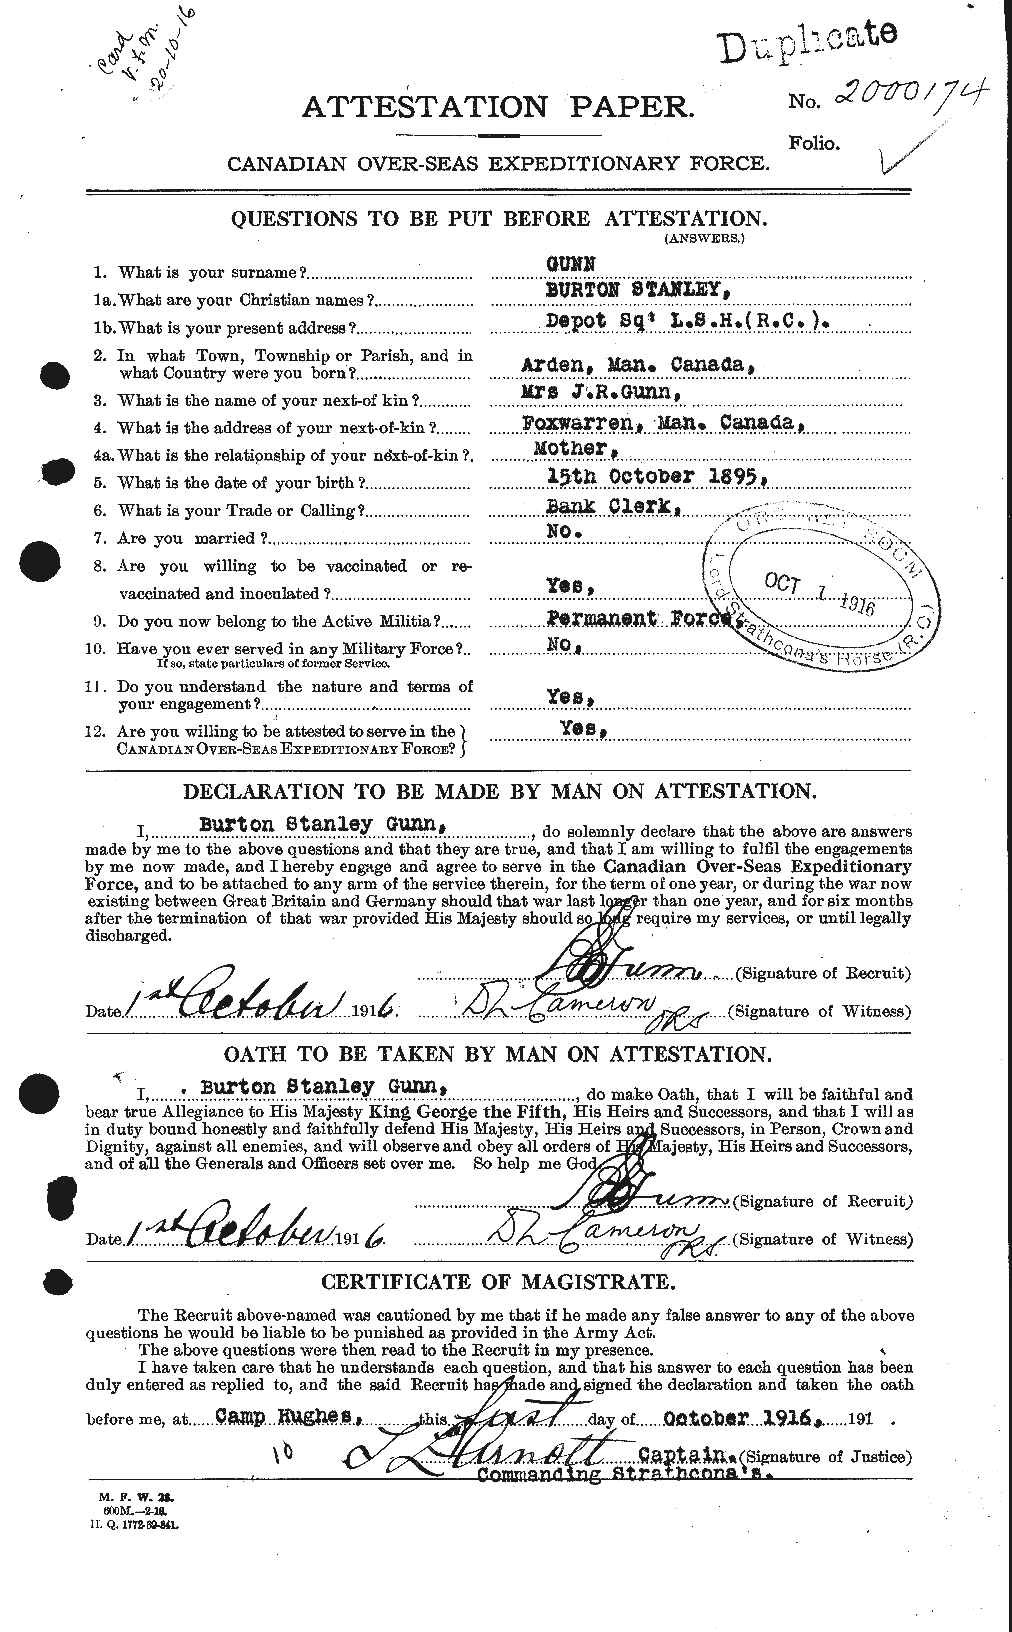 Personnel Records of the First World War - CEF 368007a